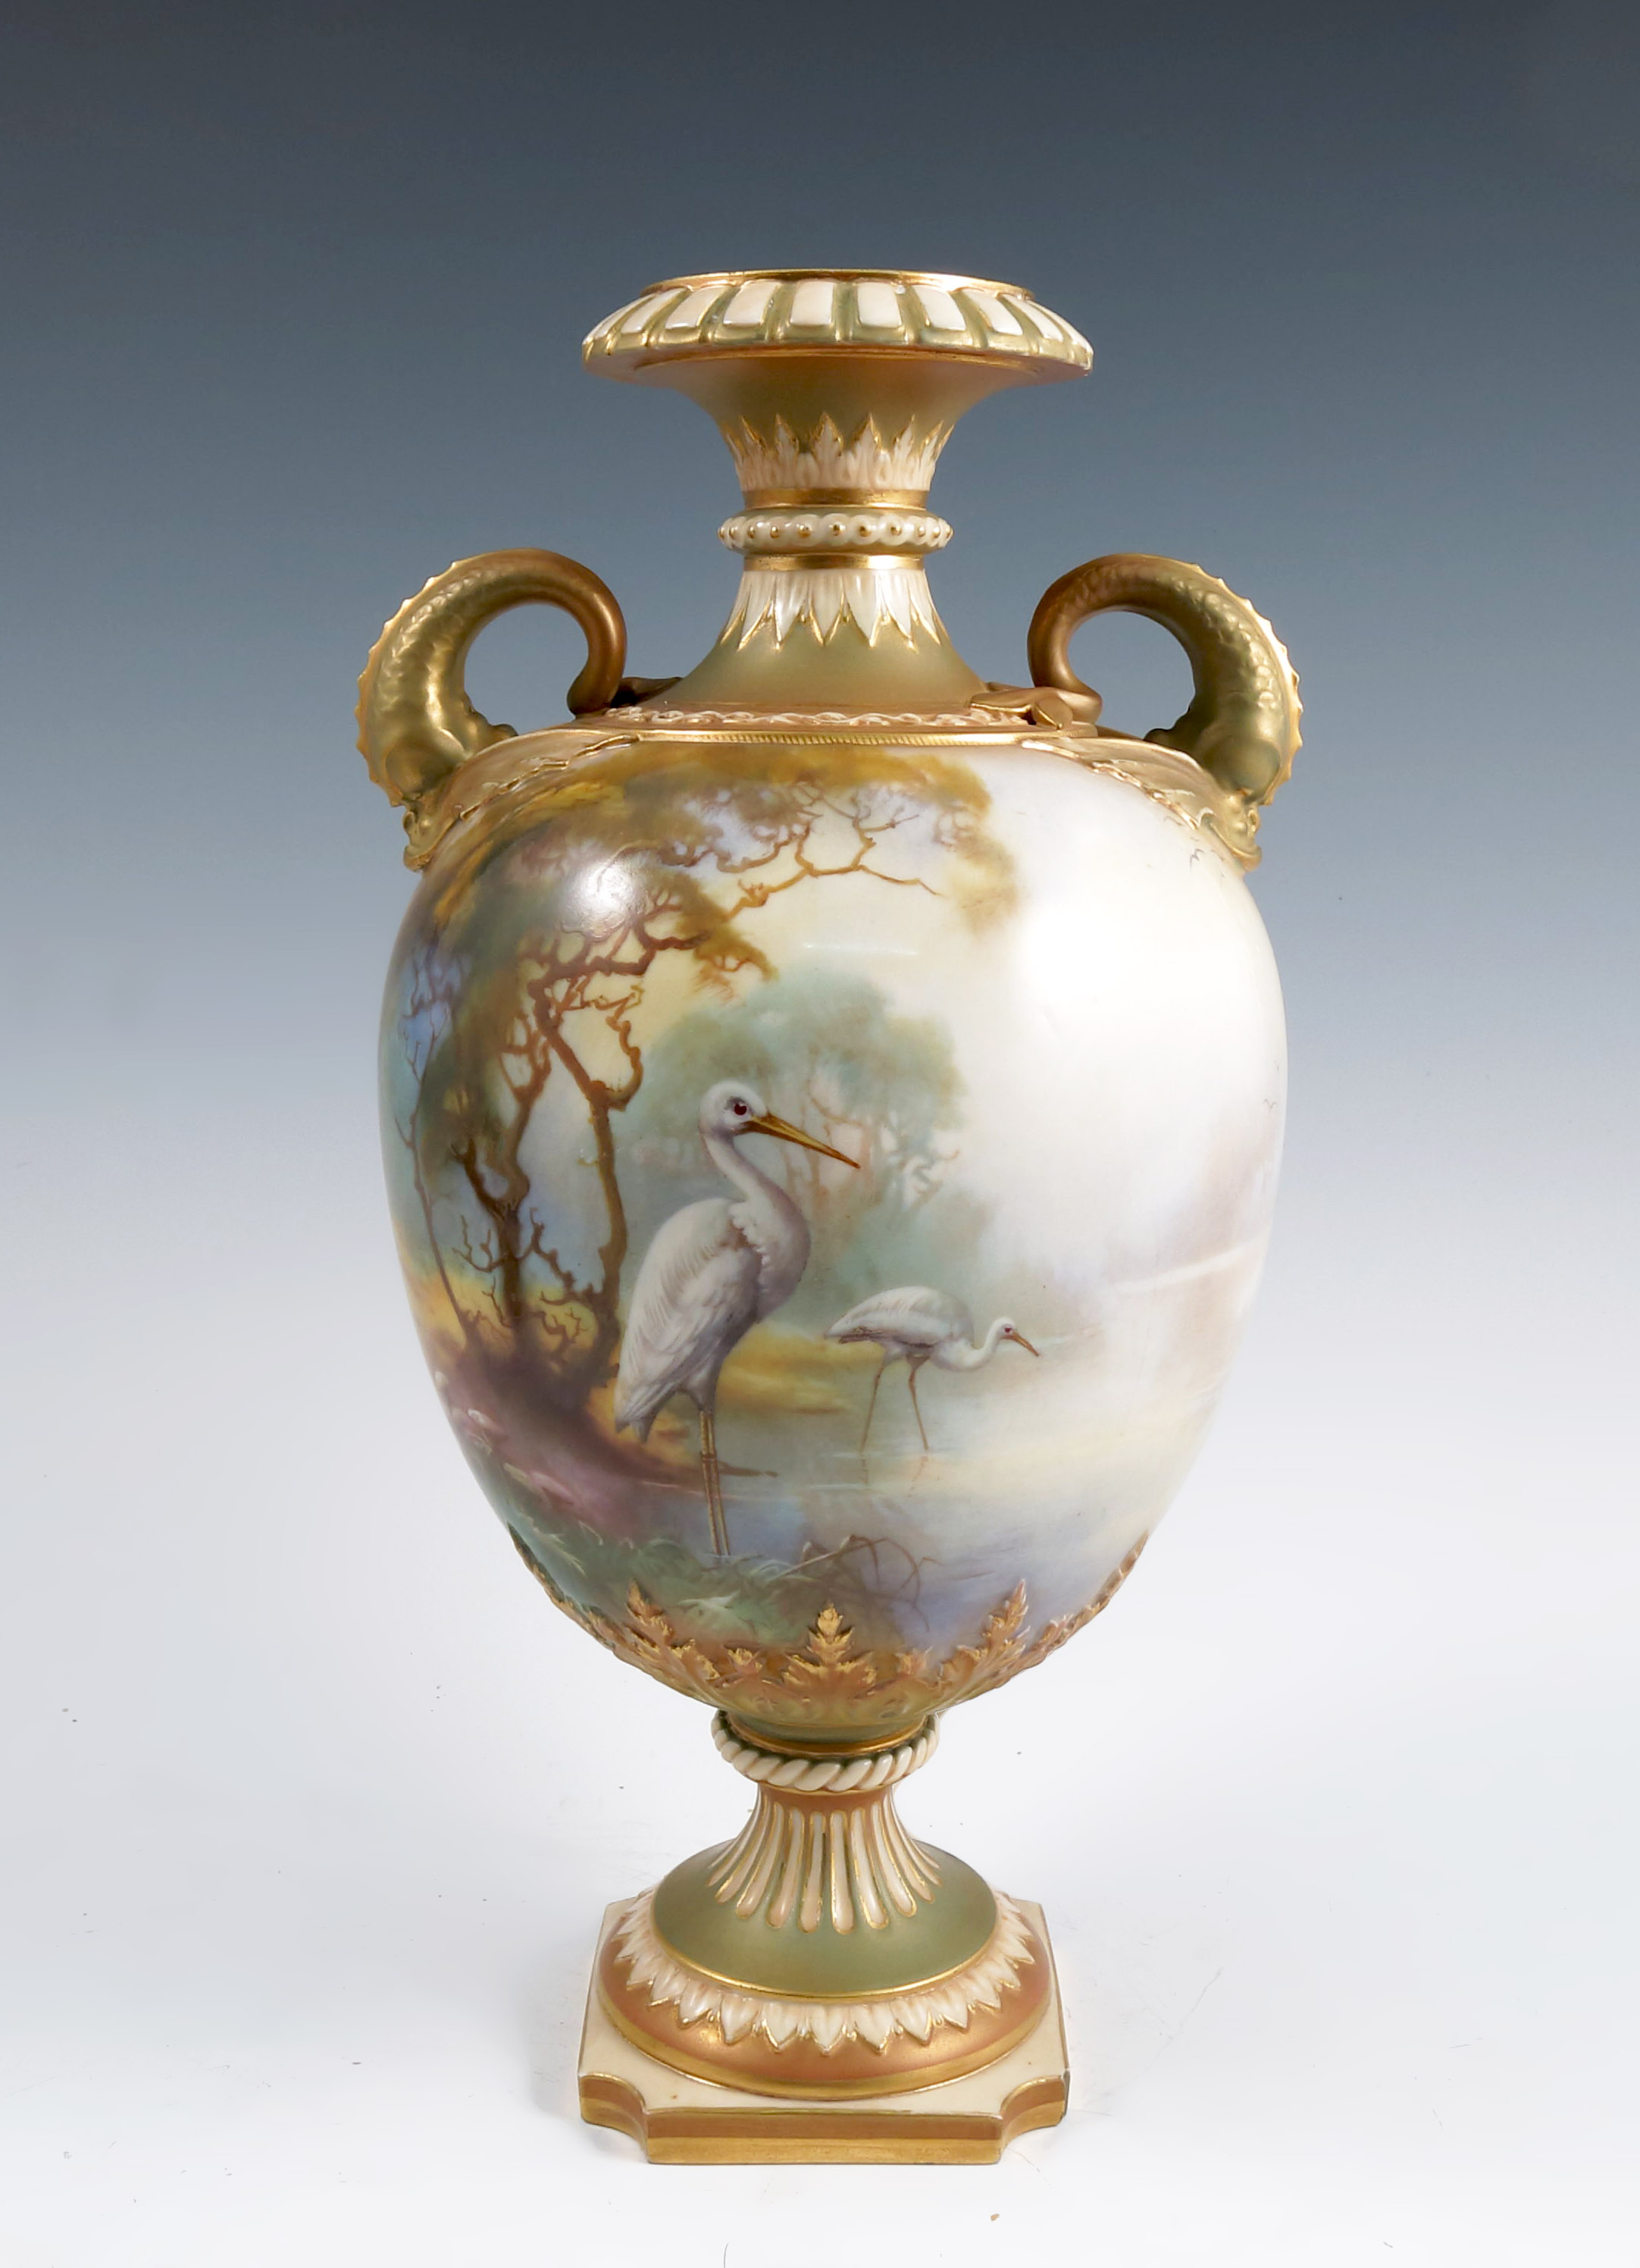 A Royal Worcester vase, decorated all around with storks in a river landscape by W Powell, having